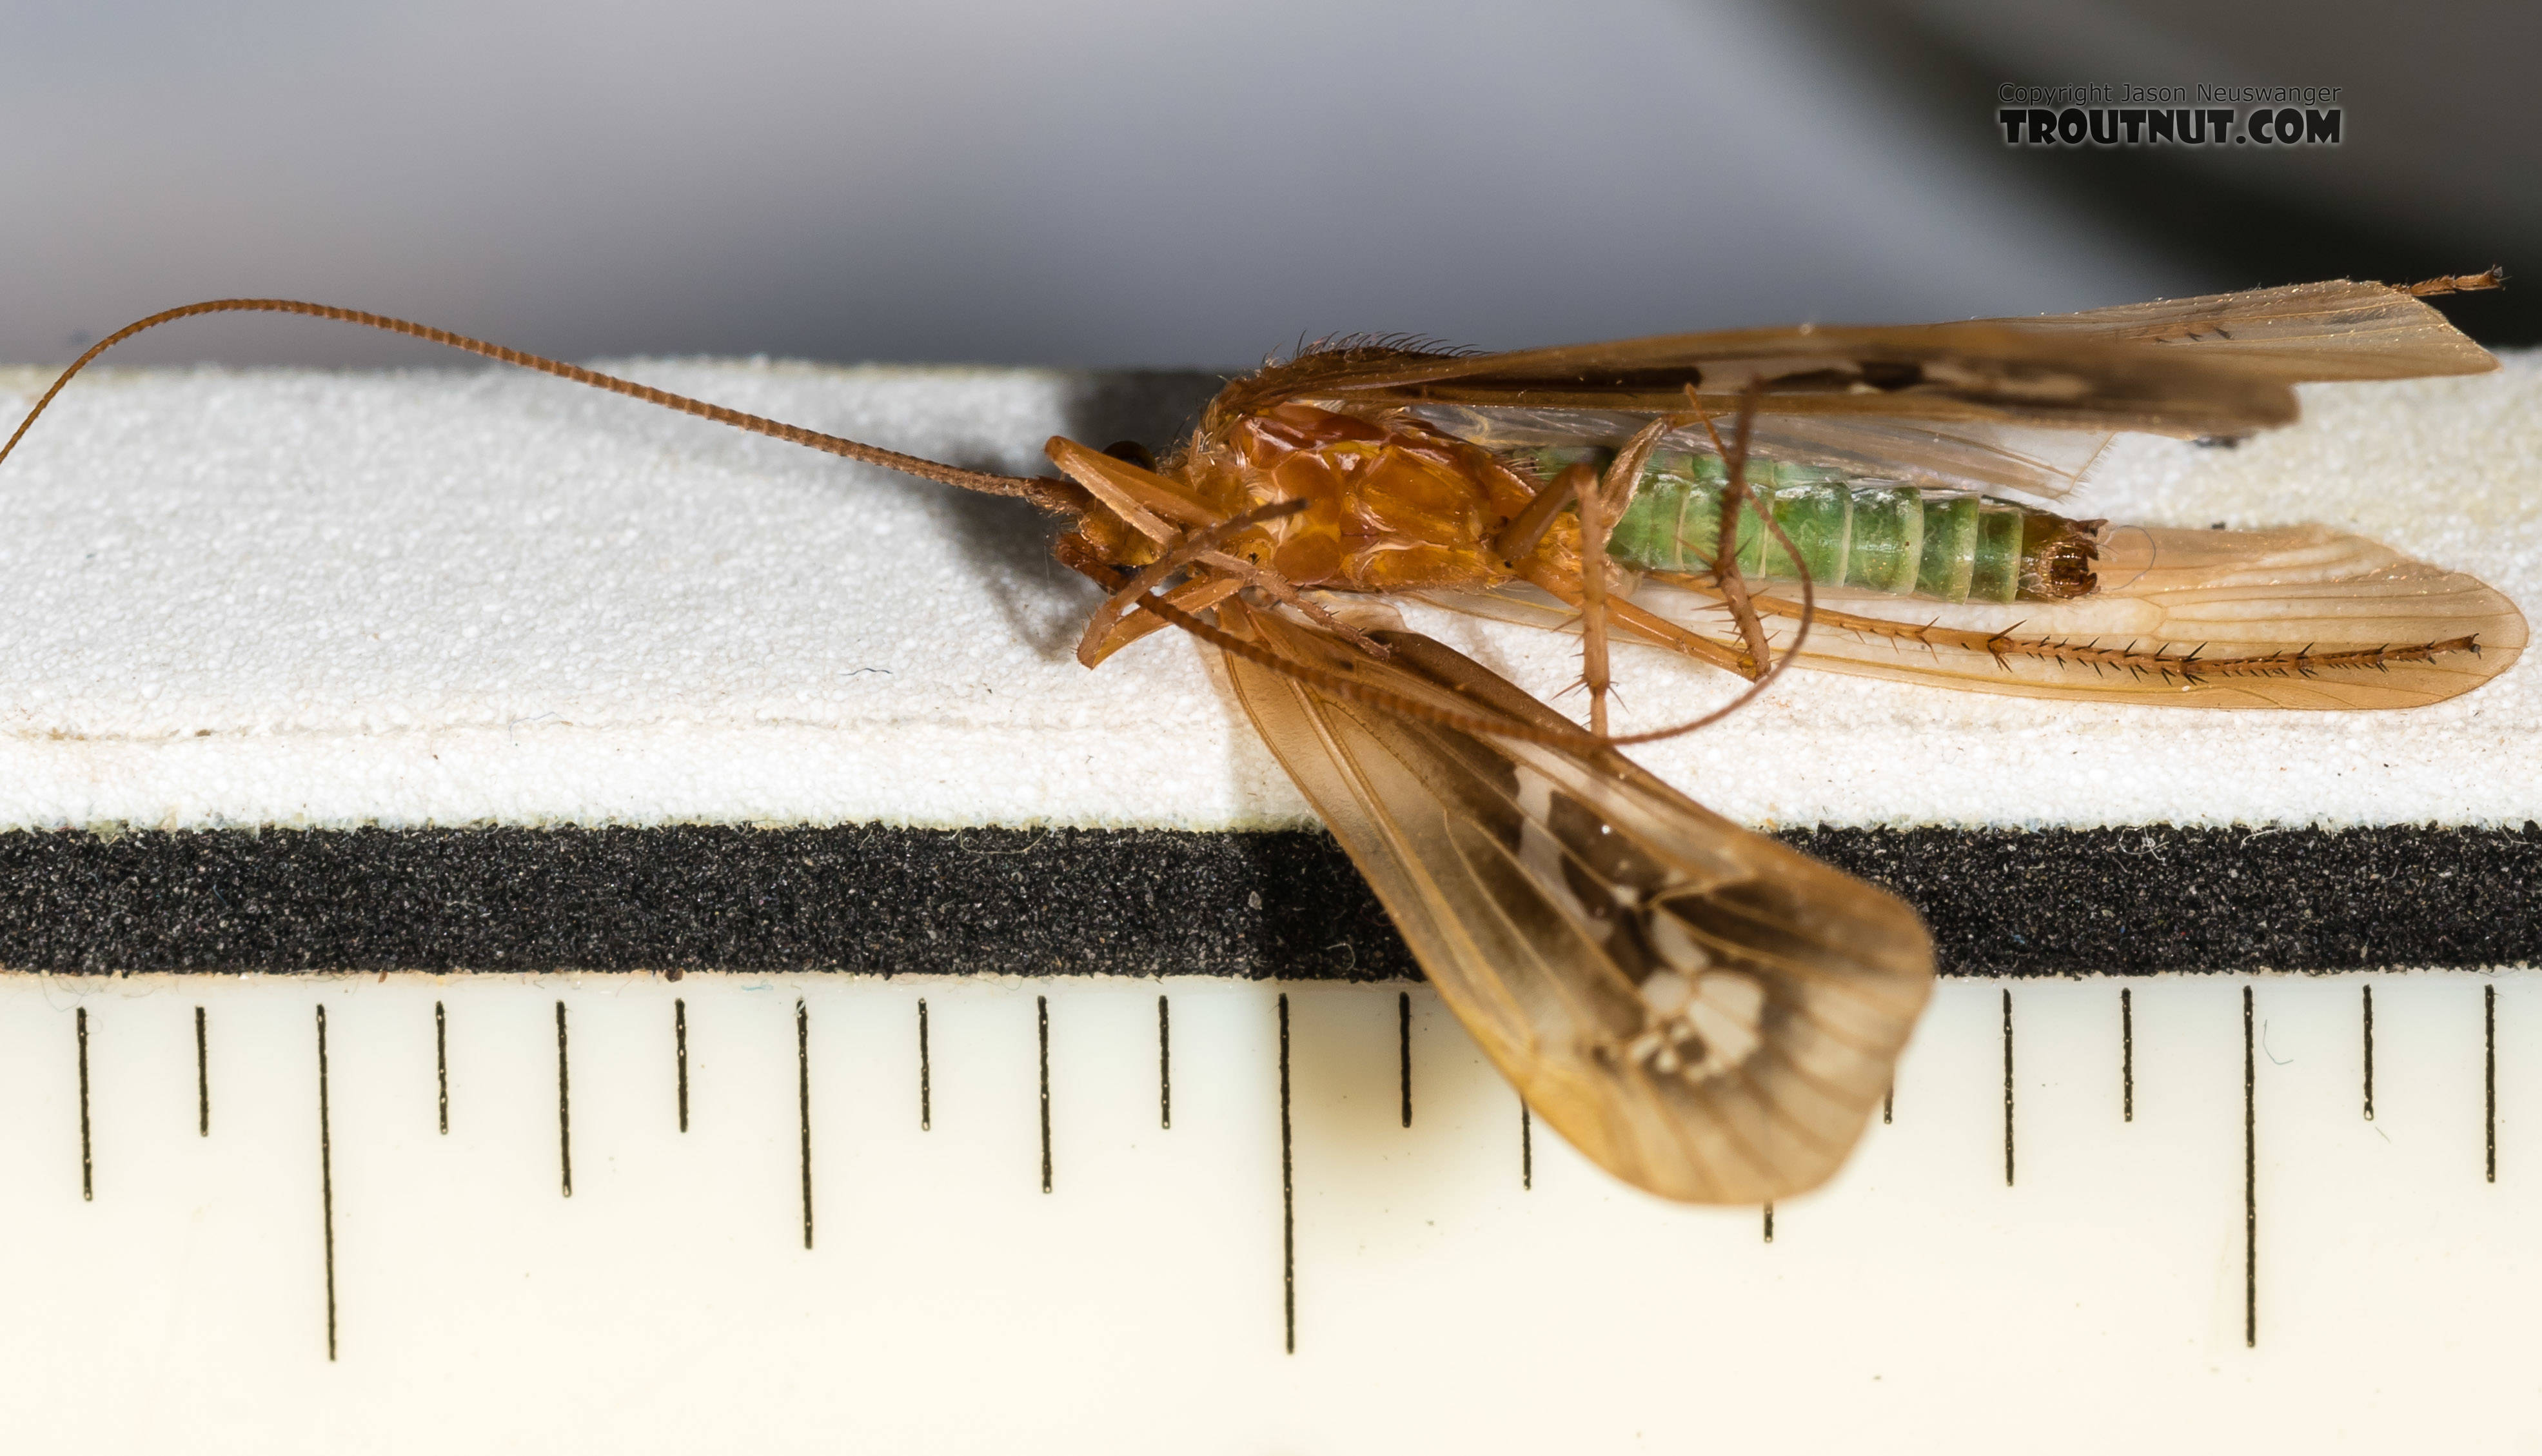 Each measurement mark is 1/16".  Male Limnephilus externus (Summer Flier Sedge) Caddisfly Adult from the Henry's Fork of the Snake River in Idaho